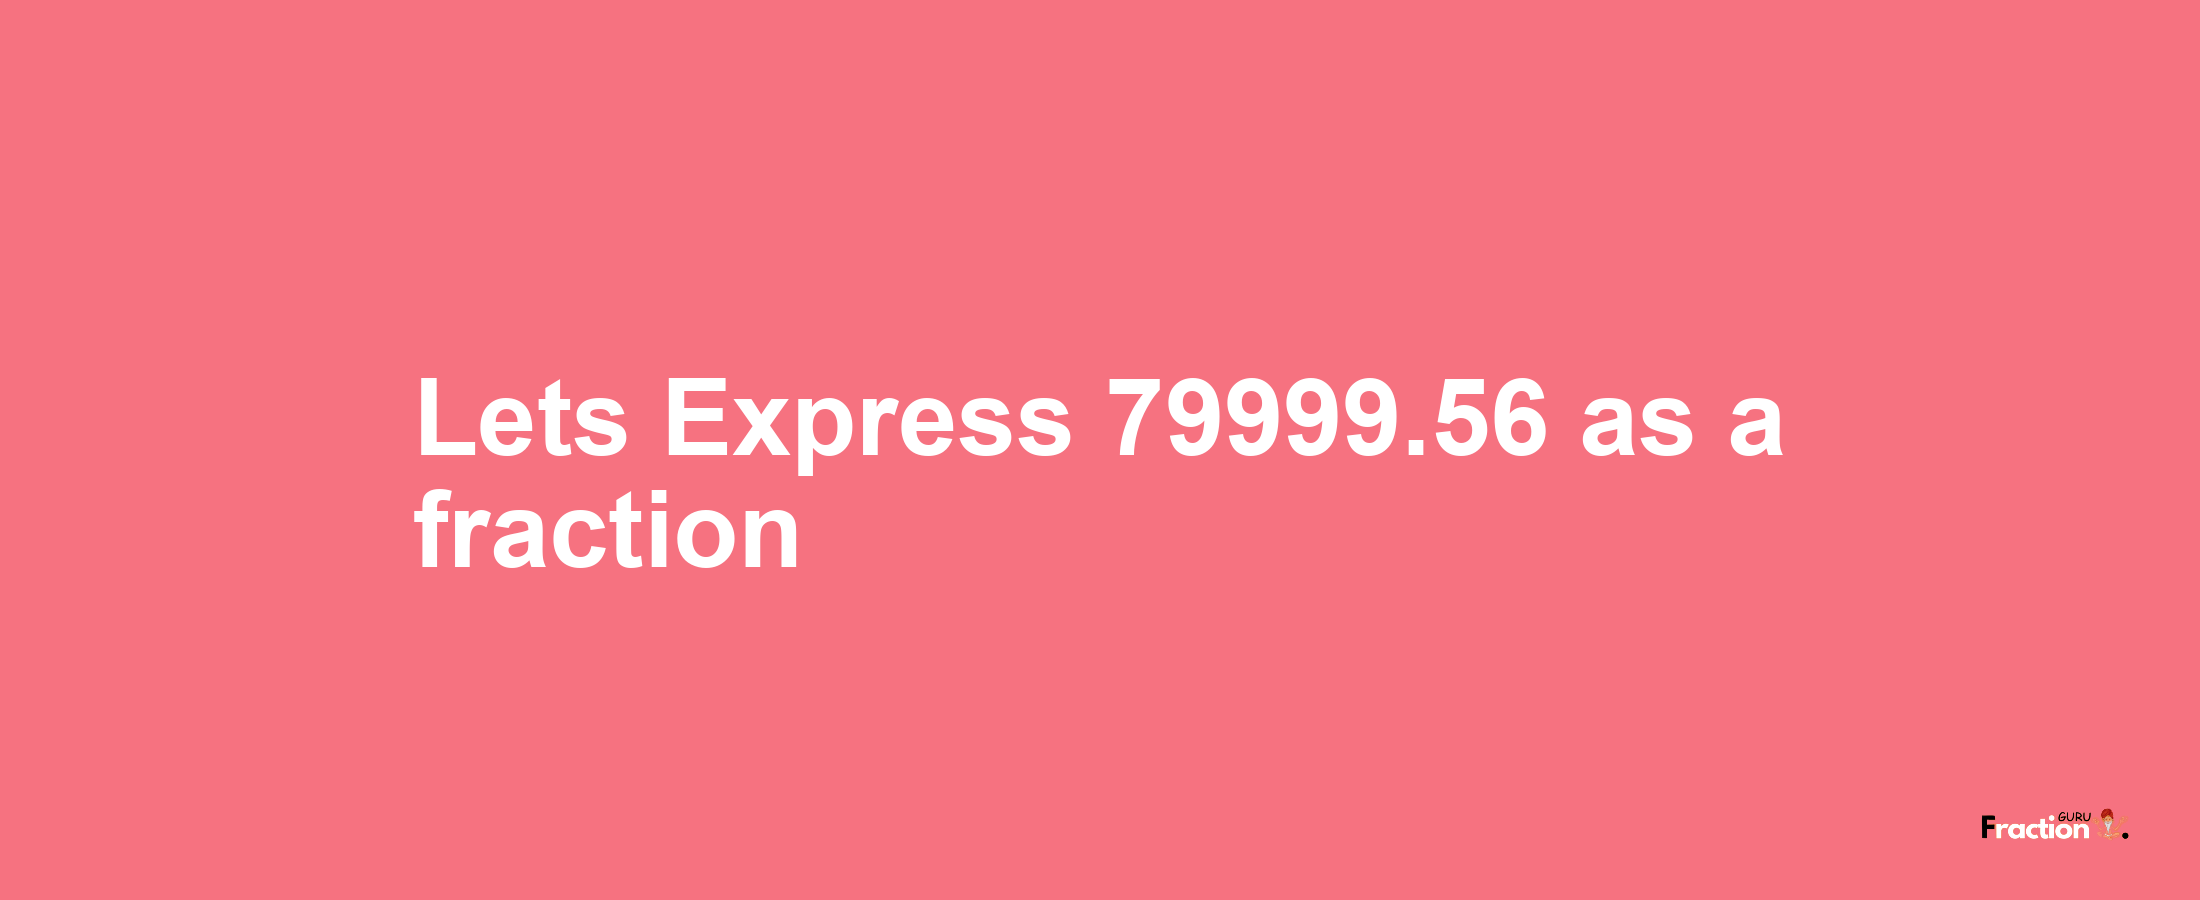 Lets Express 79999.56 as afraction